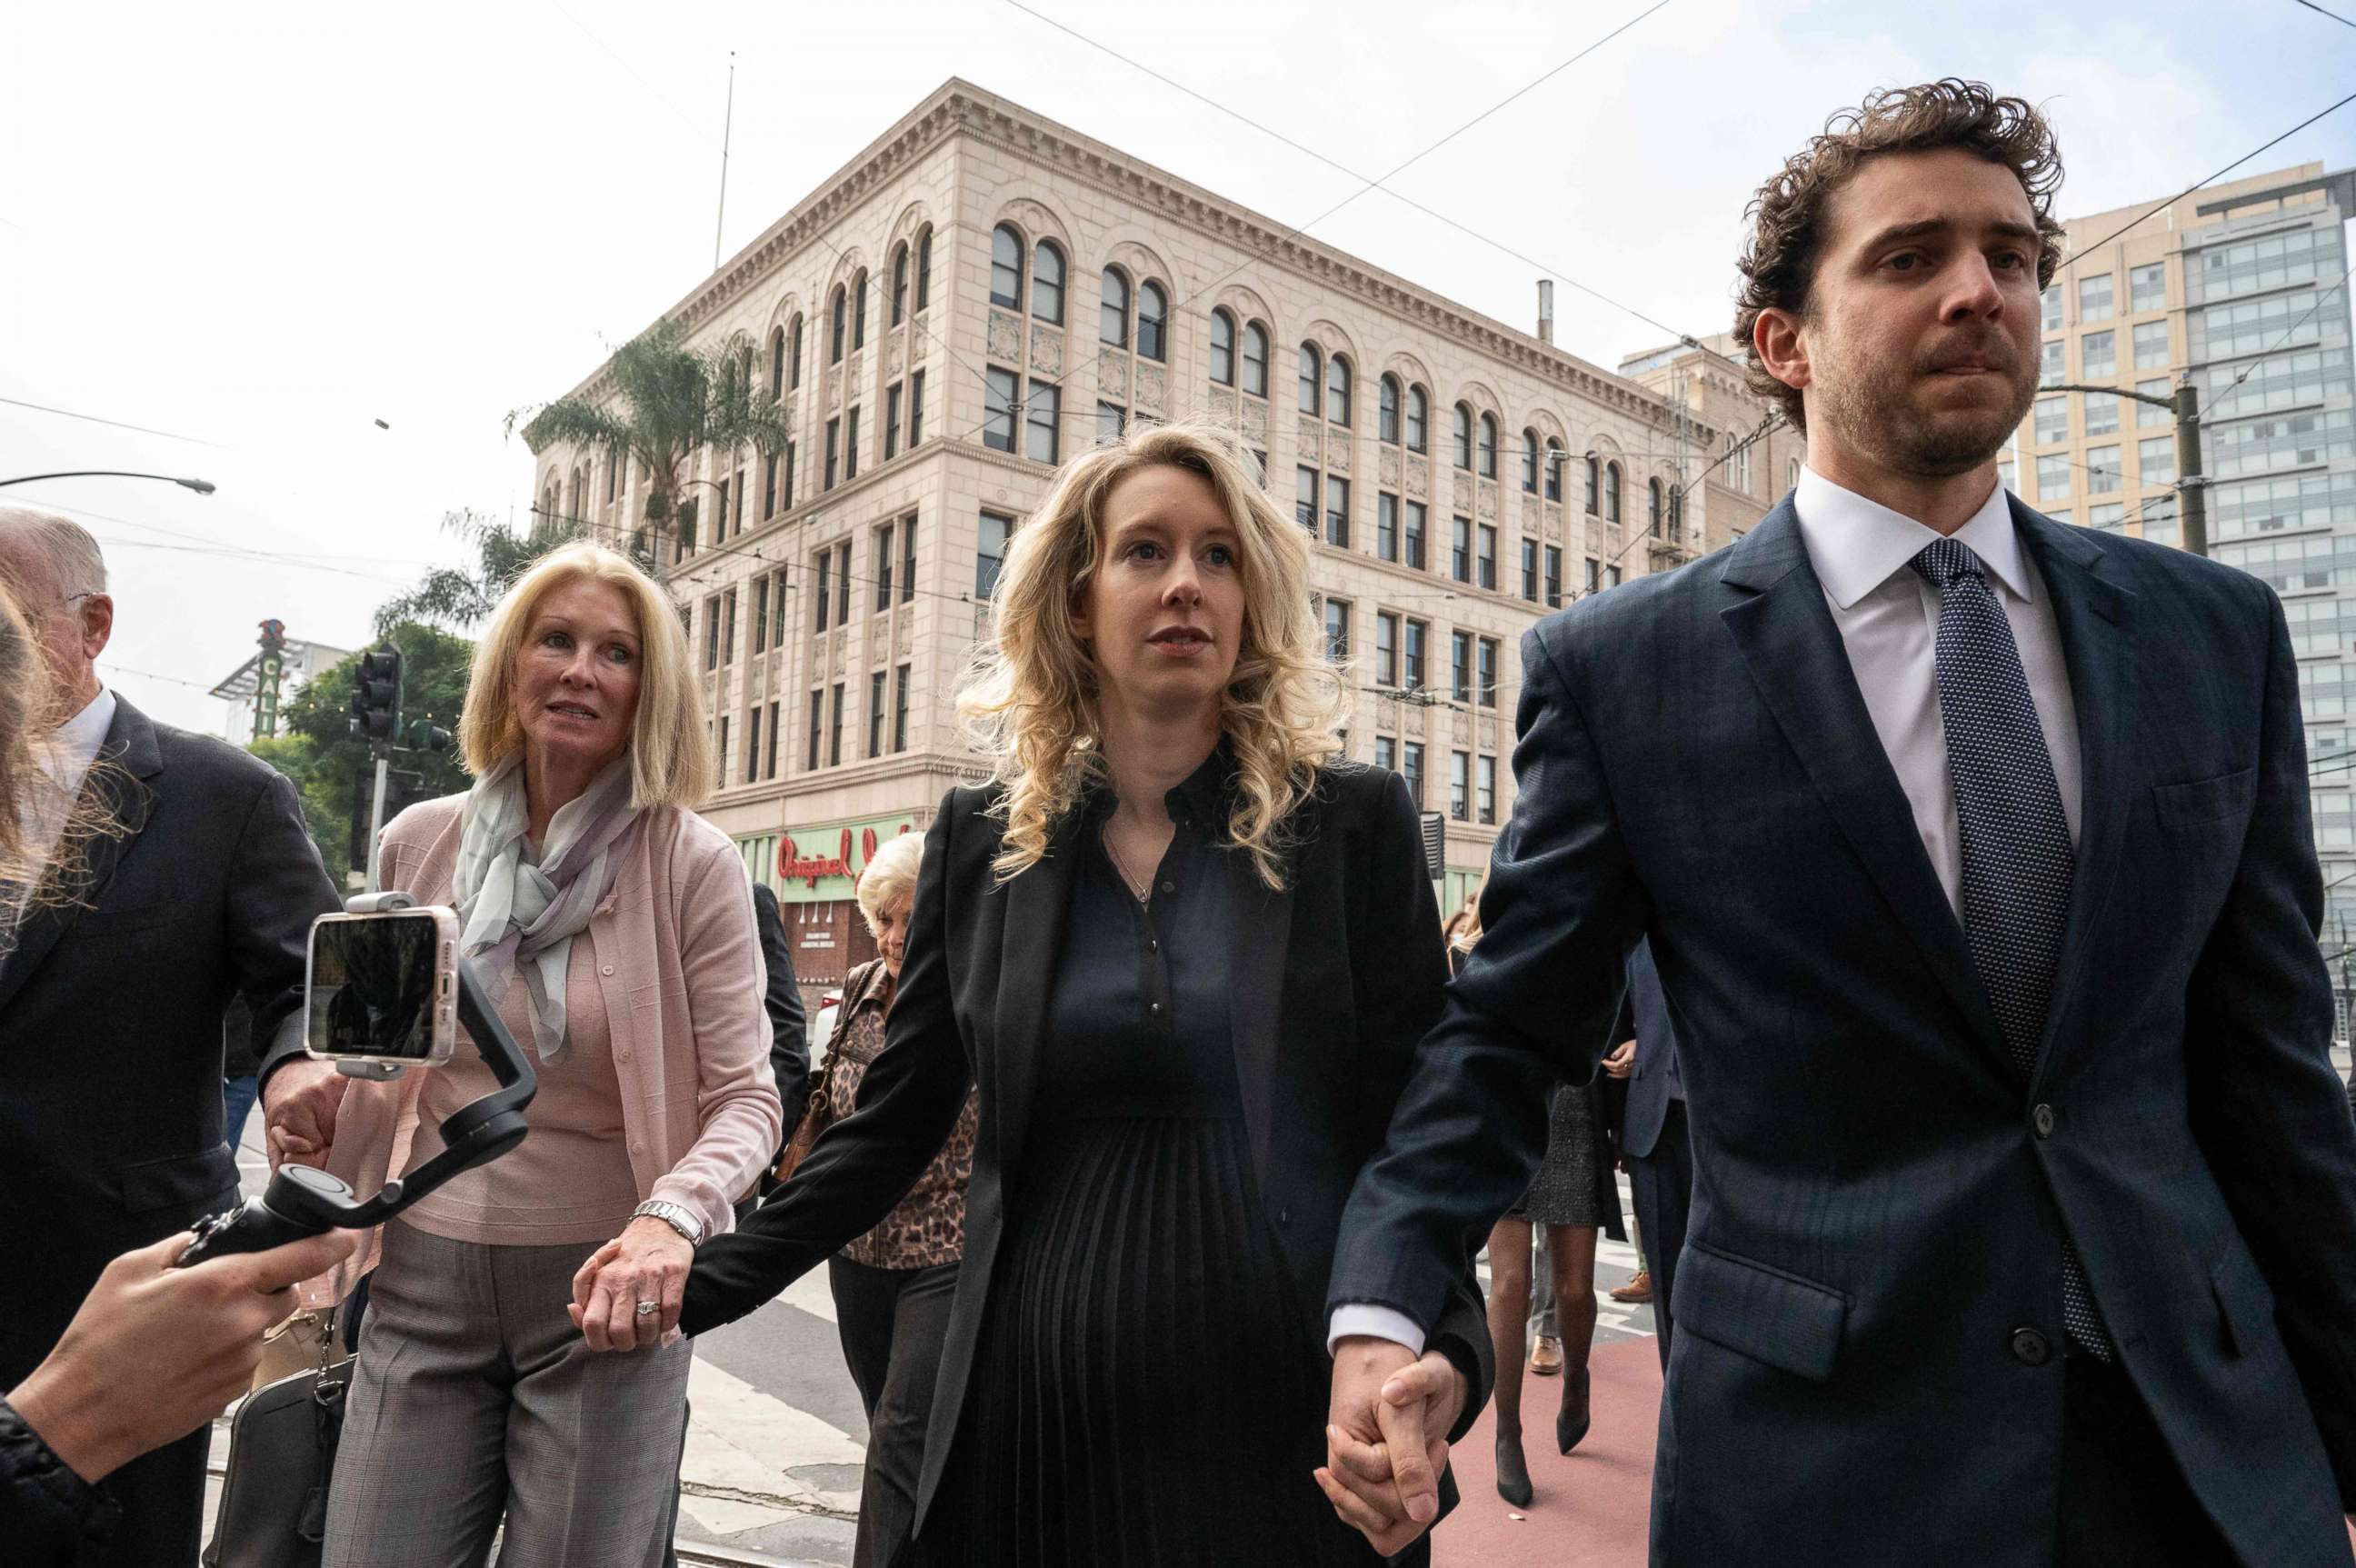 PHOTO: Elizabeth Holmes, founder and former CEO of blood testing and life sciences company Theranos, walks with her mother Noel Holmes and partner Billy Evans into the federal courthouse for her sentencing hearing on Nov. 18, 2022 in San Jose, Calif.